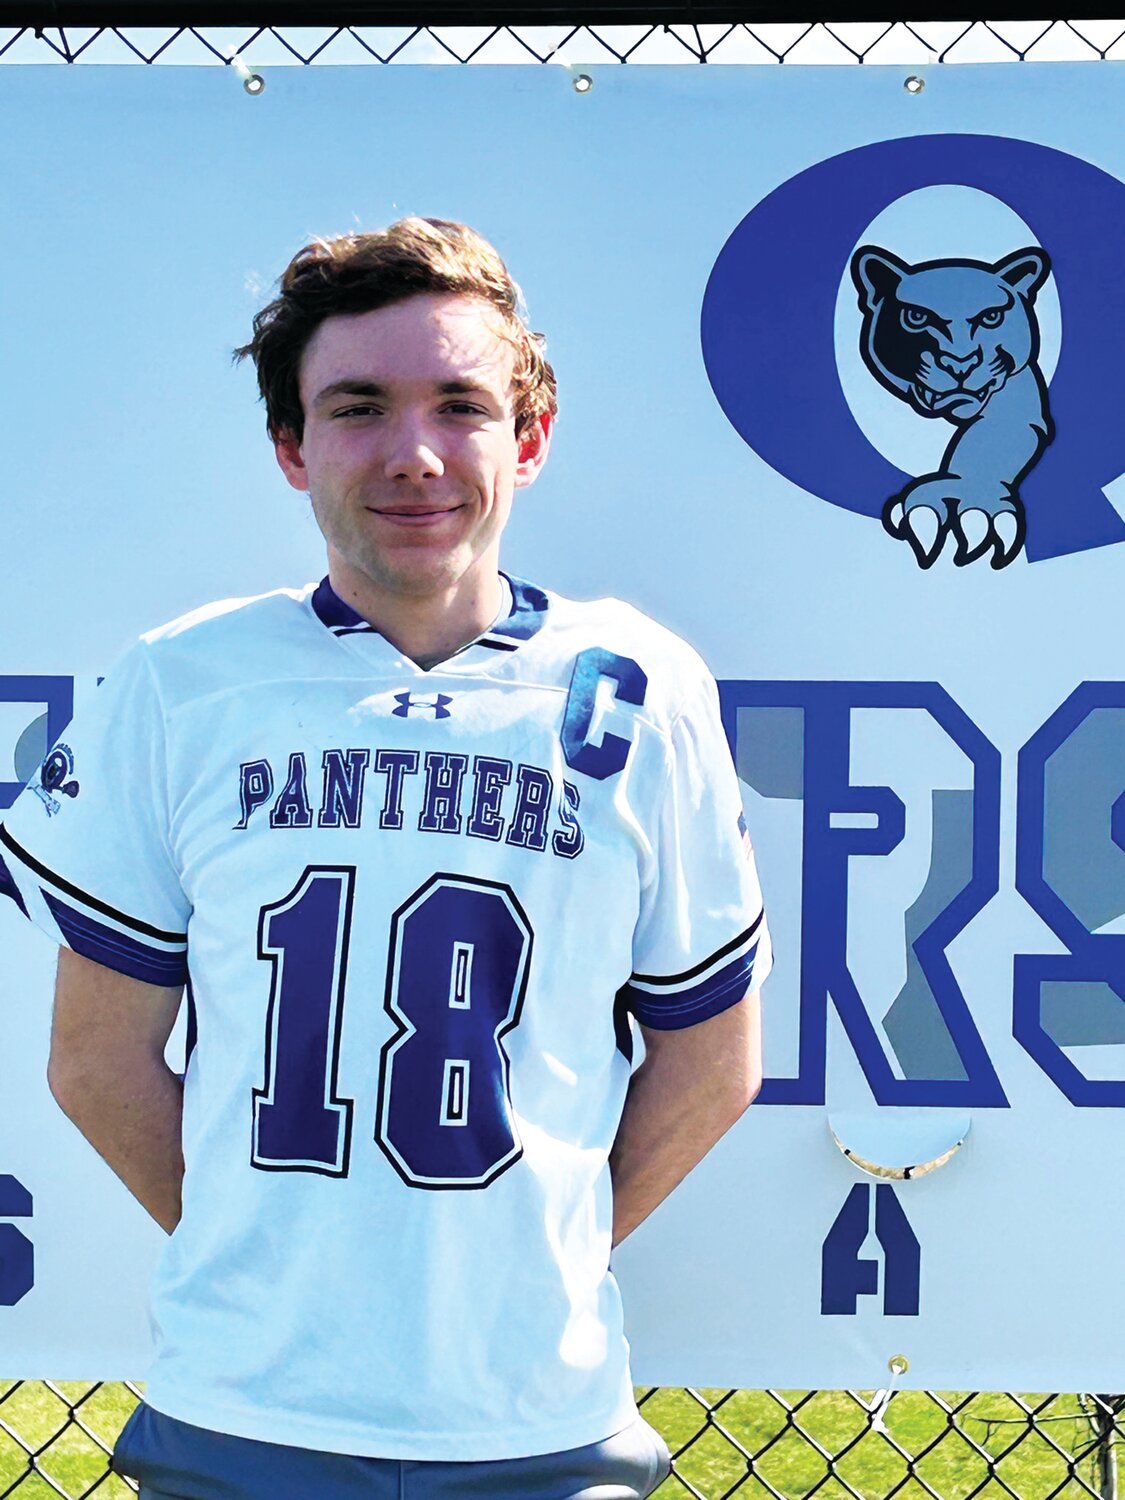 The Quakertown boys lacrosse team has rallied around the mantra “hustle, hit, never quit,” which the Panthers say emulates the play of their senior co-captain, Jacob Wackerman.